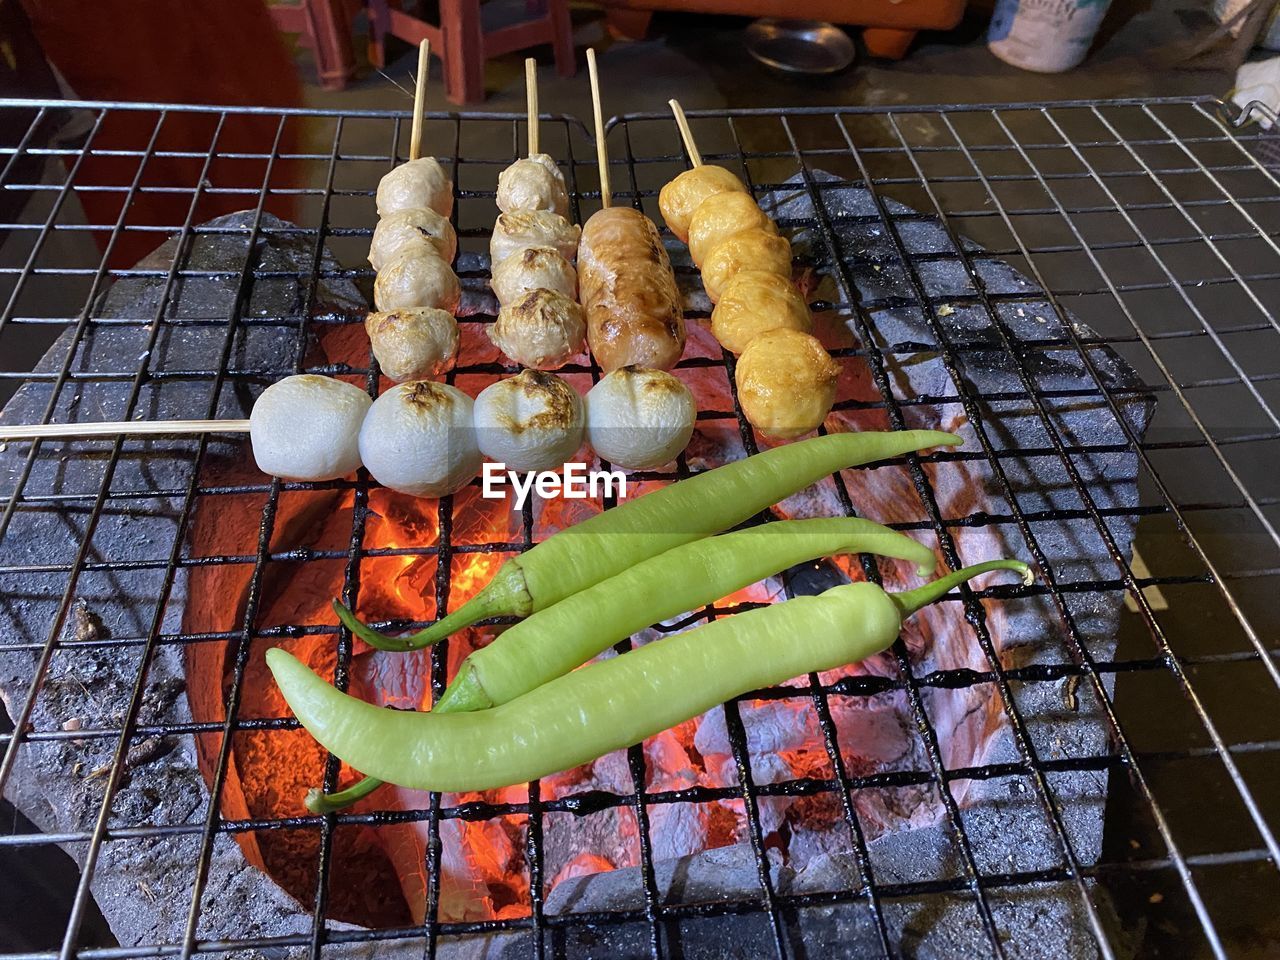 food, food and drink, dish, barbecue grill, barbecue, freshness, grilled, cuisine, grilling, healthy eating, meat, wellbeing, no people, grid, high angle view, sausage, fast food, vegetable, metal grate, heat, grate, day, cooking, preparing food, outdoors, metal, meal, large group of objects